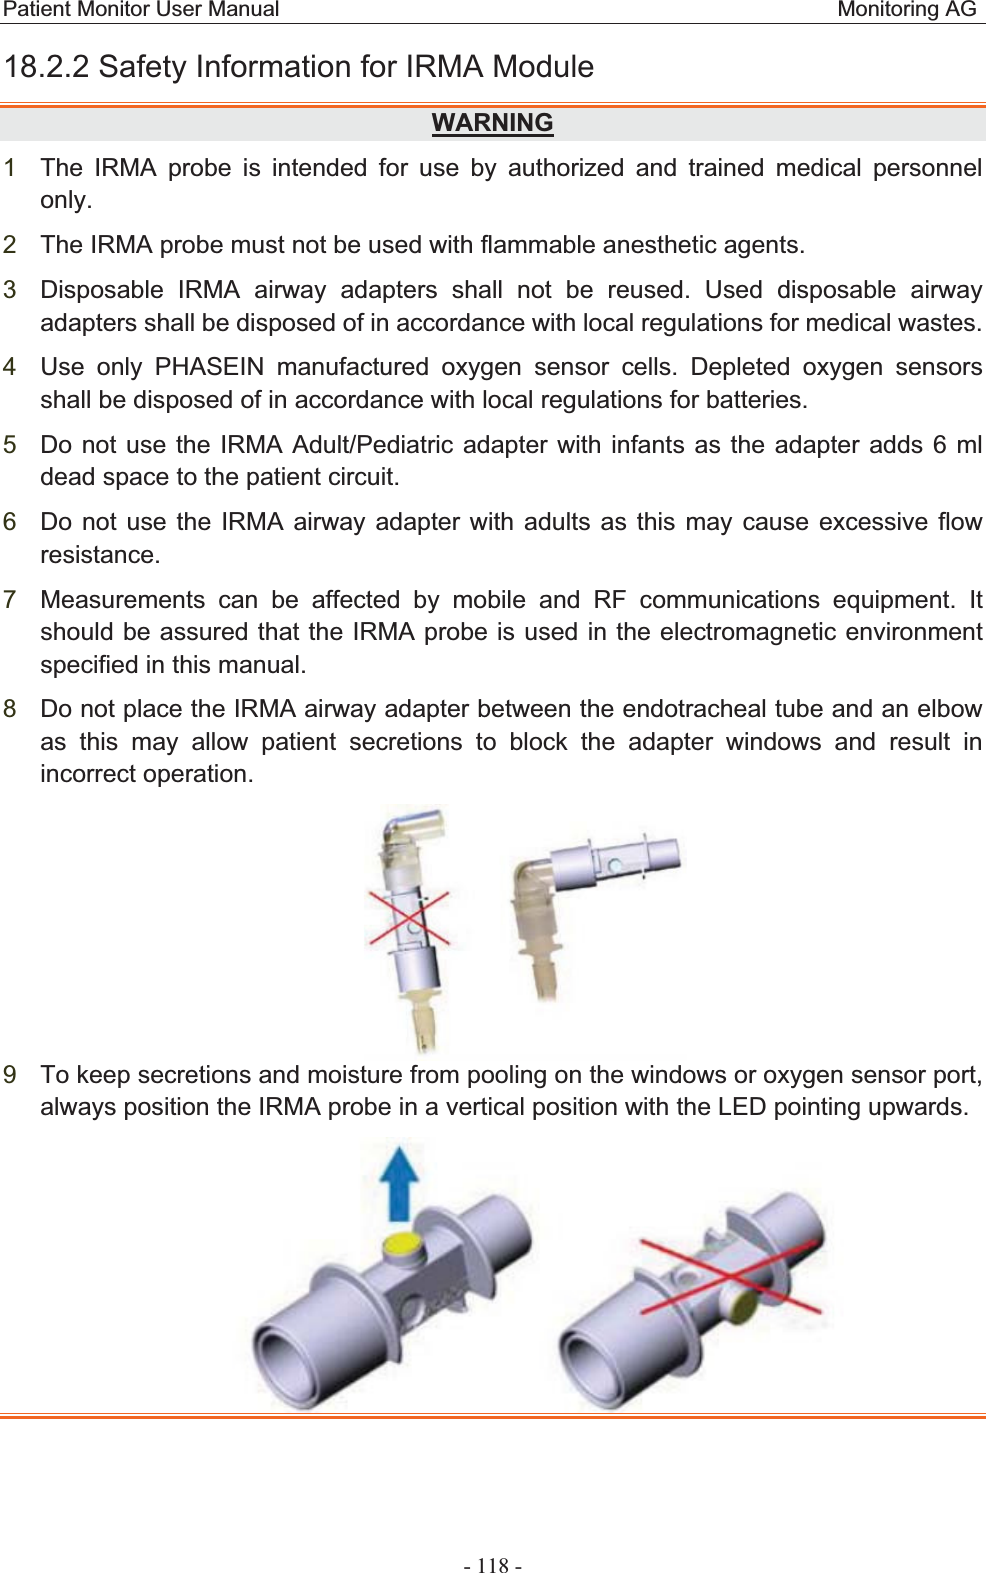 Patient Monitor User Manual                                                   Monitoring AG  - 118 - 18.2.2 Safety Information for IRMA ModuleWARNING1The IRMA probe is intended for use by authorized and trained medical personnel only.2The IRMA probe must not be used with flammable anesthetic agents. 3Disposable IRMA airway adapters shall not be reused. Used disposable airway adapters shall be disposed of in accordance with local regulations for medical wastes. 4Use only PHASEIN manufactured oxygen sensor cells. Depleted oxygen sensors shall be disposed of in accordance with local regulations for batteries. 5Do not use the IRMA Adult/Pediatric adapter with infants as the adapter adds 6 ml dead space to the patient circuit. 6Do not use the IRMA airway adapter with adults as this may cause excessive flow resistance.7Measurements can be affected by mobile and RF communications equipment. It should be assured that the IRMA probe is used in the electromagnetic environment specified in this manual. 8Do not place the IRMA airway adapter between the endotracheal tube and an elbow as this may allow patient secretions to block the adapter windows and result in incorrect operation.  9To keep secretions and moisture from pooling on the windows or oxygen sensor port, always position the IRMA probe in a vertical position with the LED pointing upwards.  